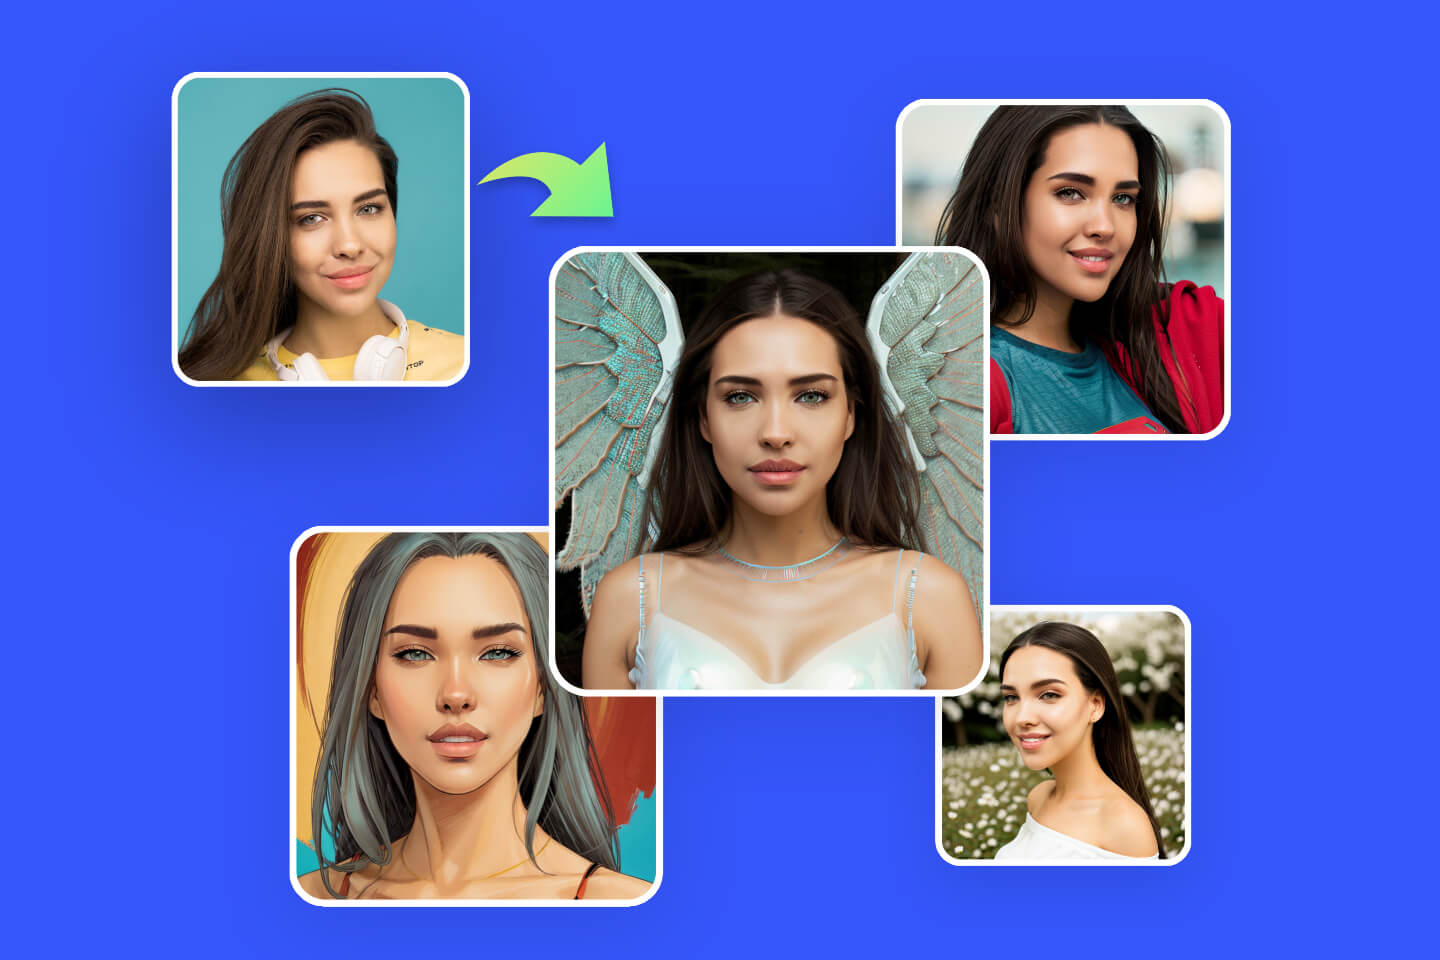 Convert a female selfie into styles of AI generated avatars